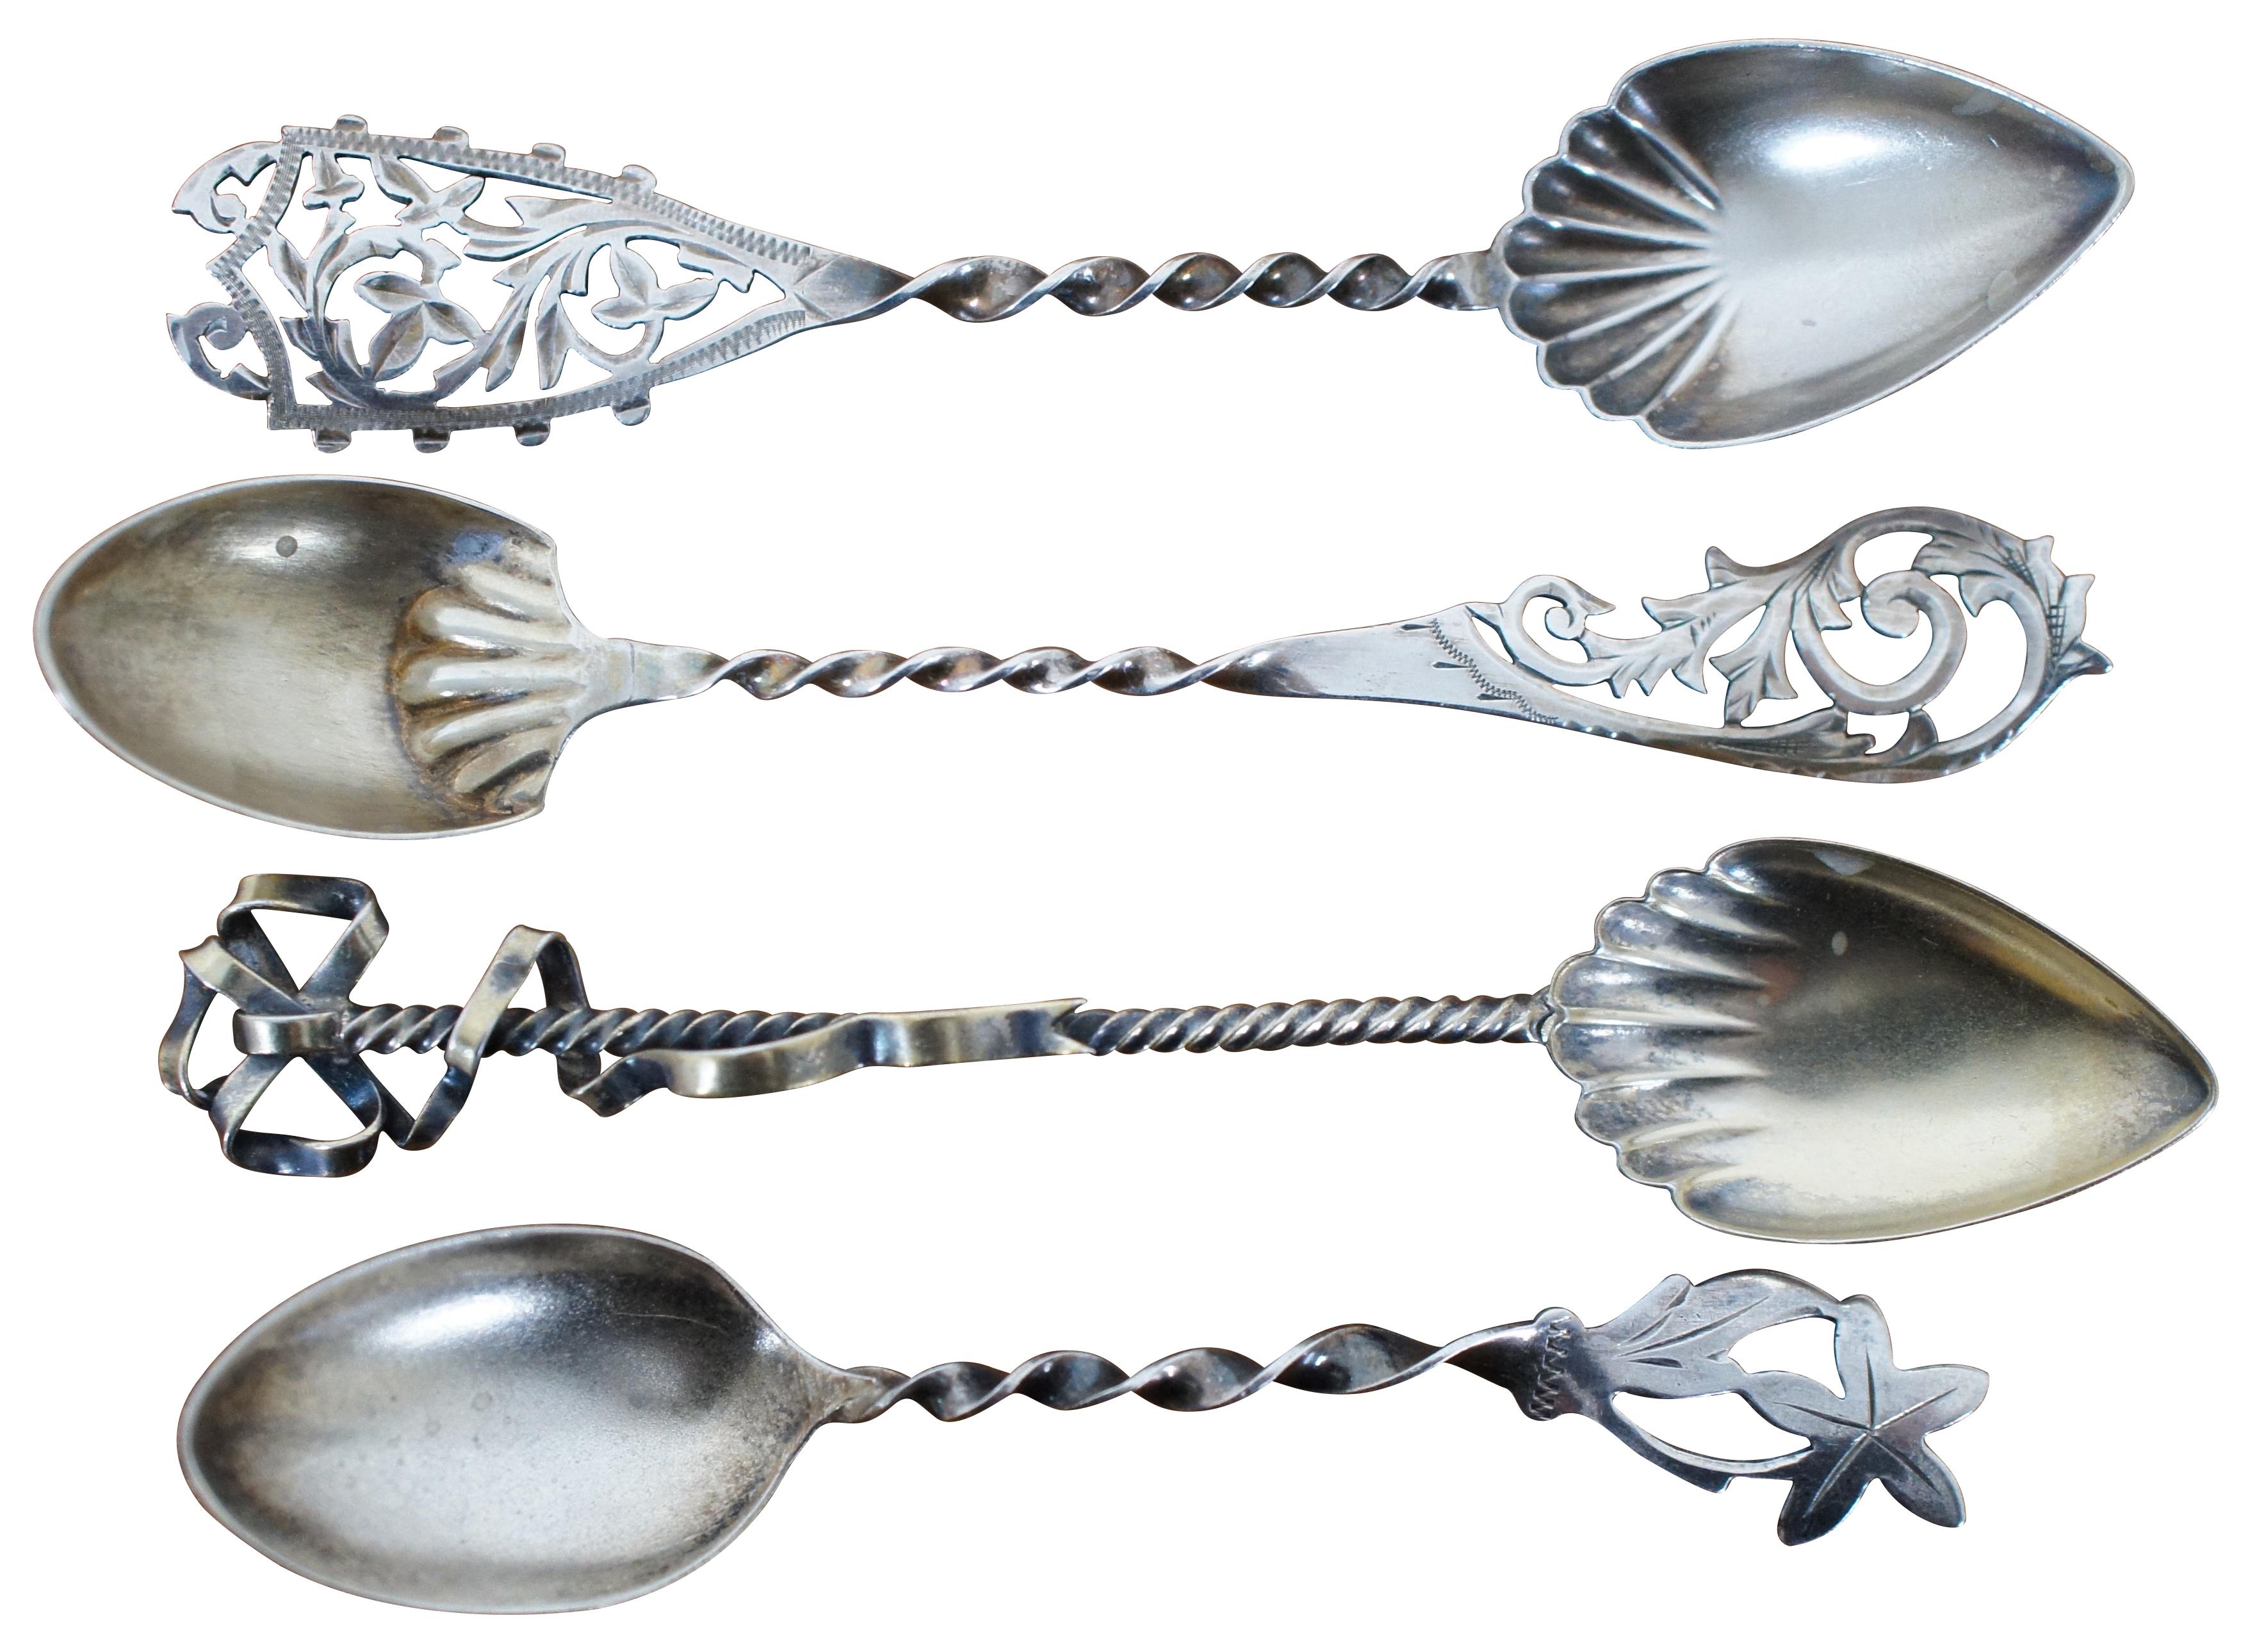 Lot of 4 antique sterling silver coffee / sugar spoons with scallop shell design on the bowls, twisted handles, and pierced / reticulated handles. One by Campbell-Metcalf Silver Co.

Approx - 4” x 0.875” (Length x Width) / Combined Weight - 25.5 g.